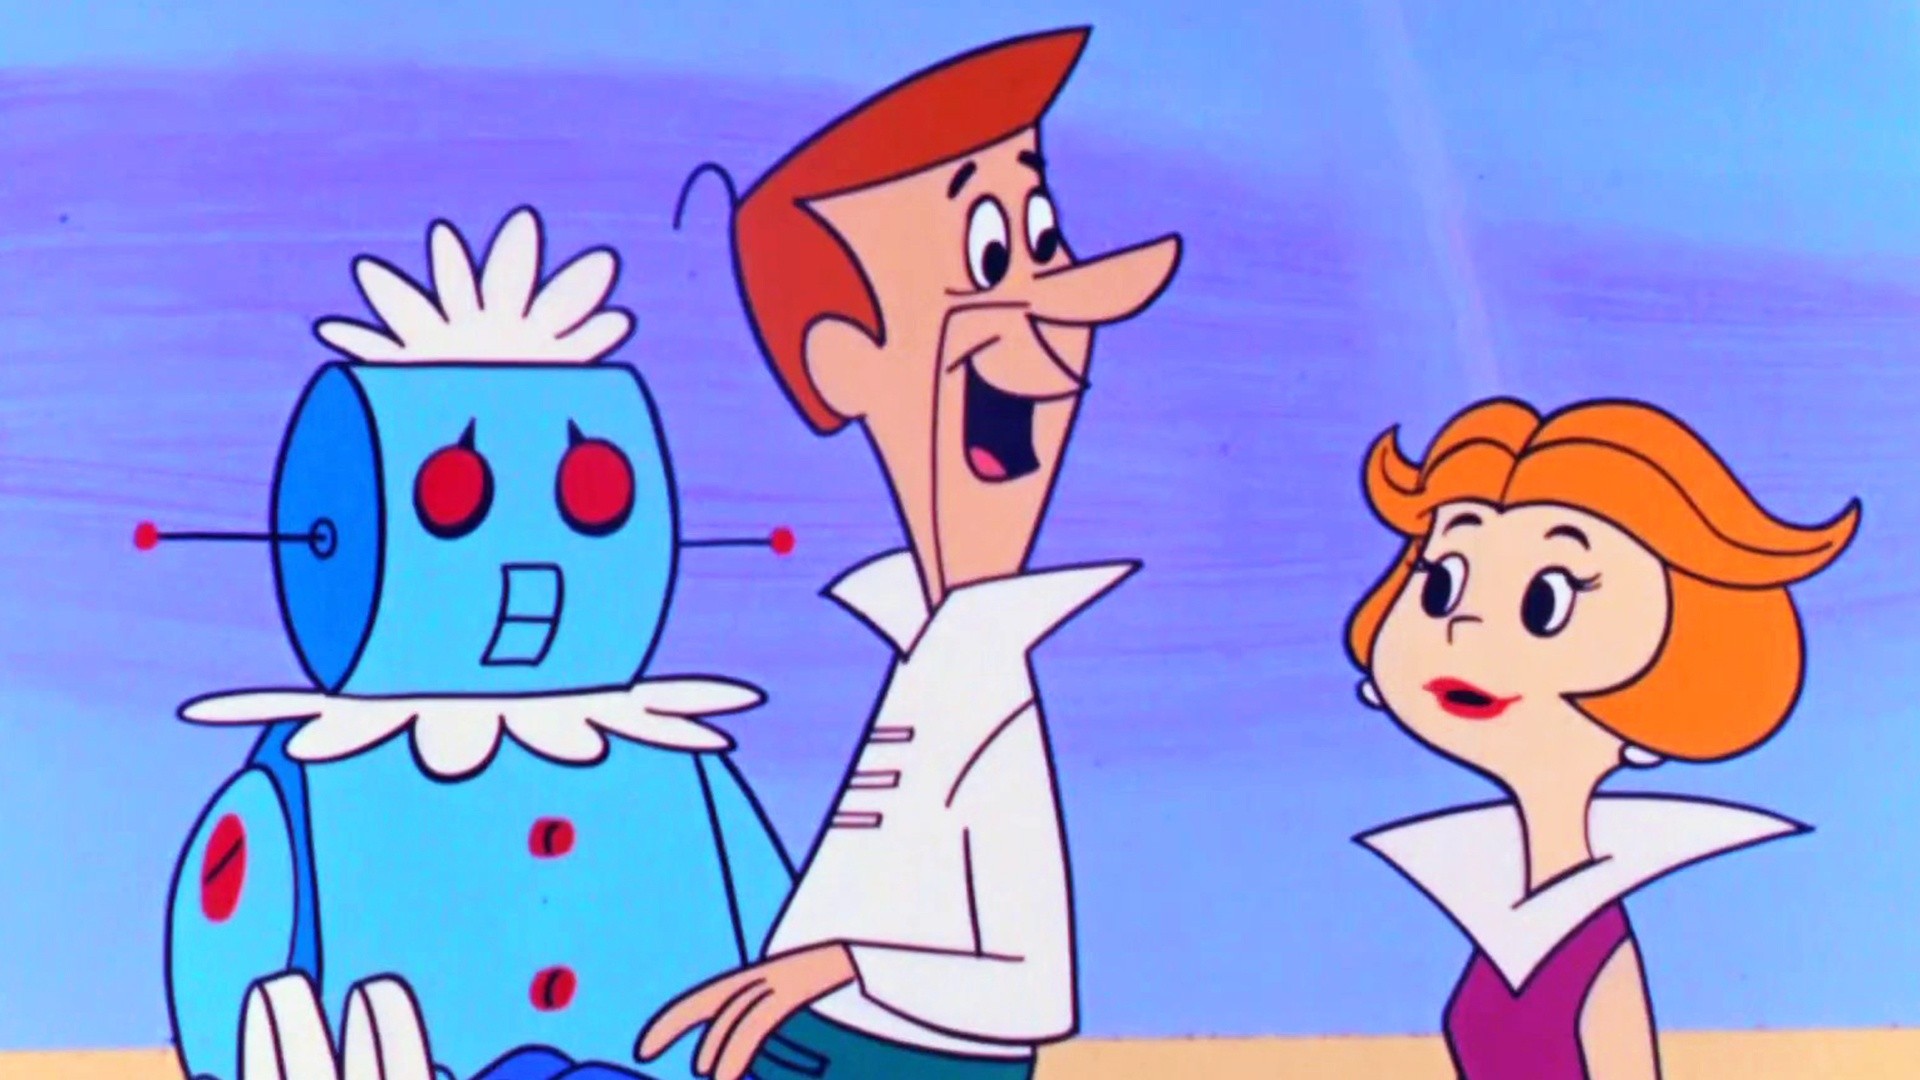 Happy birthday, George Jetson! Fans point out he was born in 2022